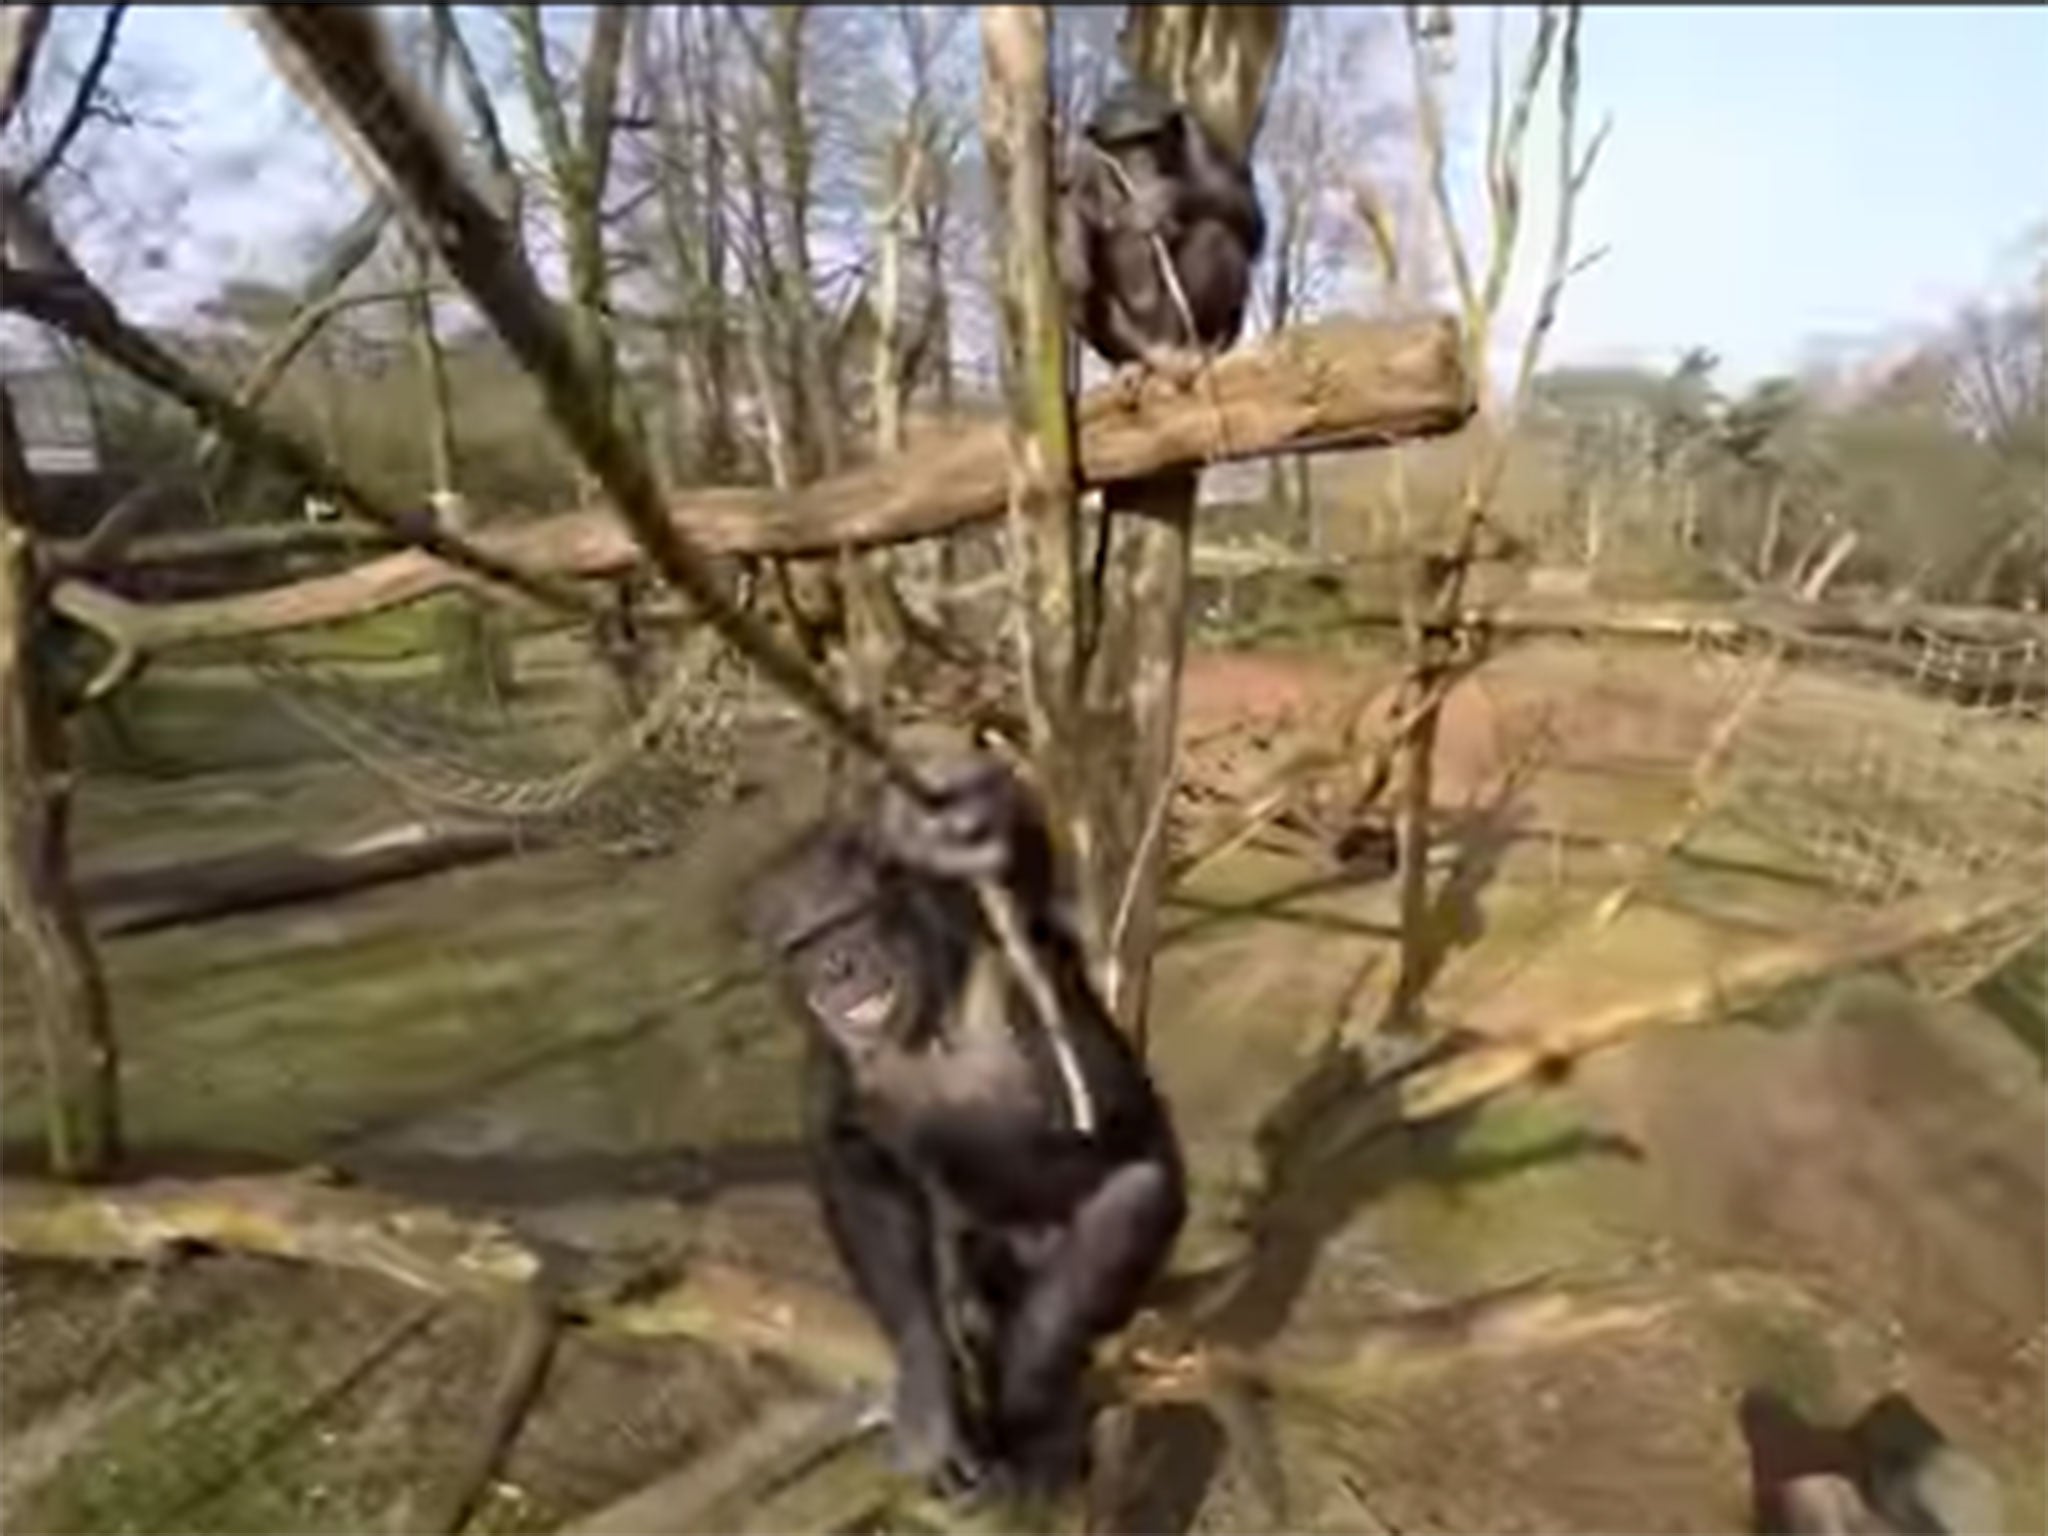 The chimpanzee was filmed swatting the drone from the air (Ruptly)